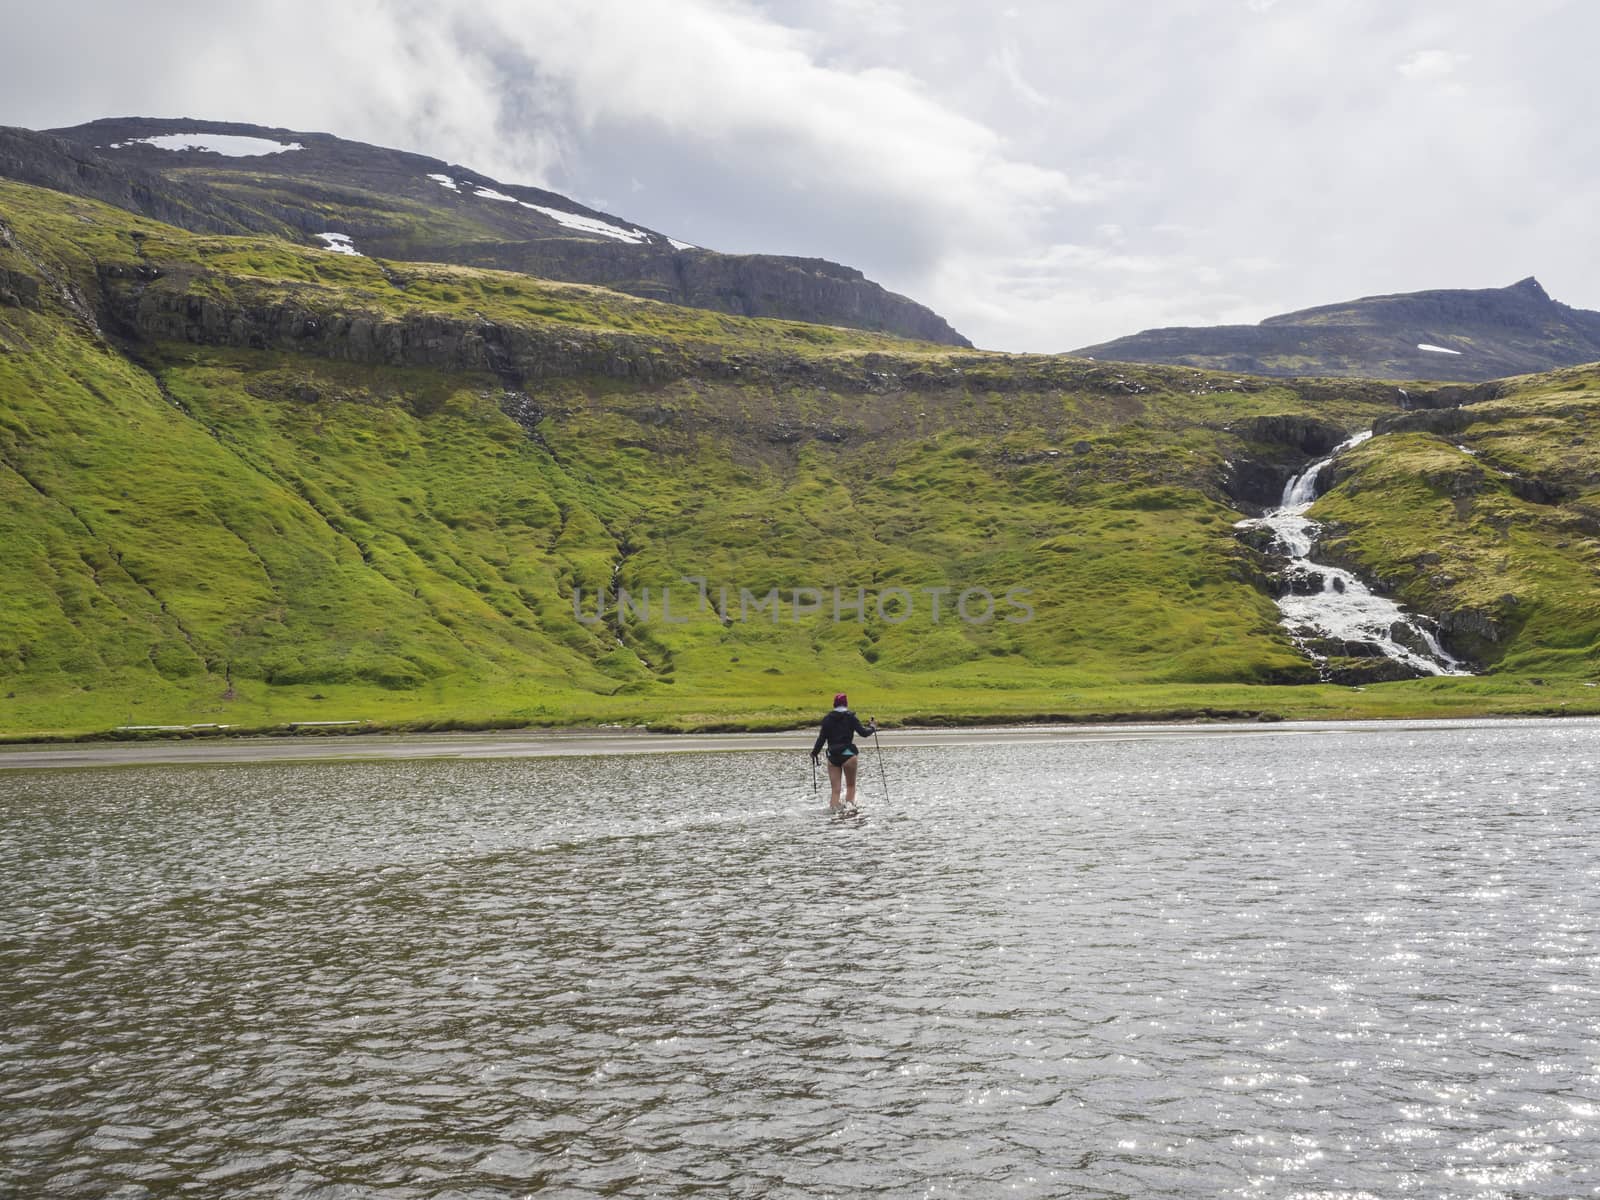 Hiker woman with trekking poles in jacket, purple hat and bare legs crossing river in Iceland Hornstrandir on trek to Hornbjarg cliff, waterfall and green hills in background. Hiking and leisure theme